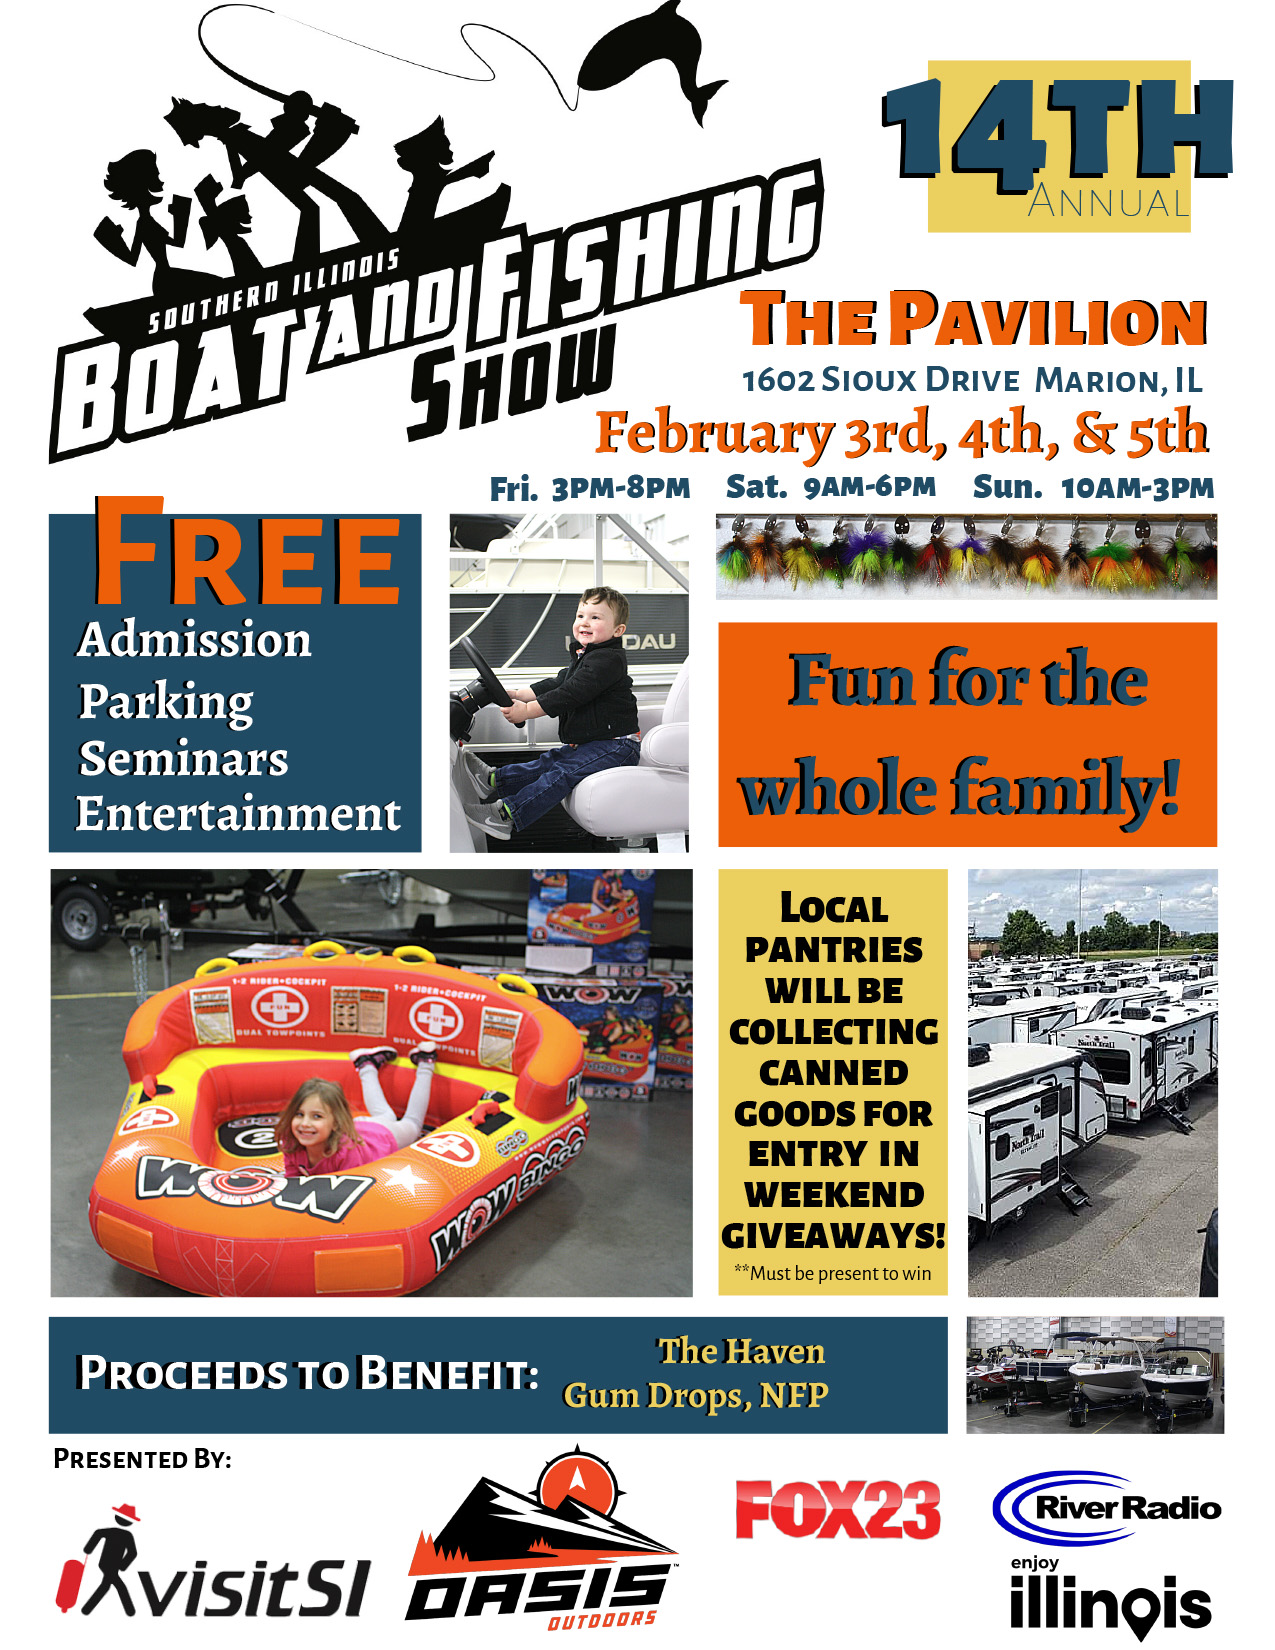 Southern Illinois Boat & Fishing Show